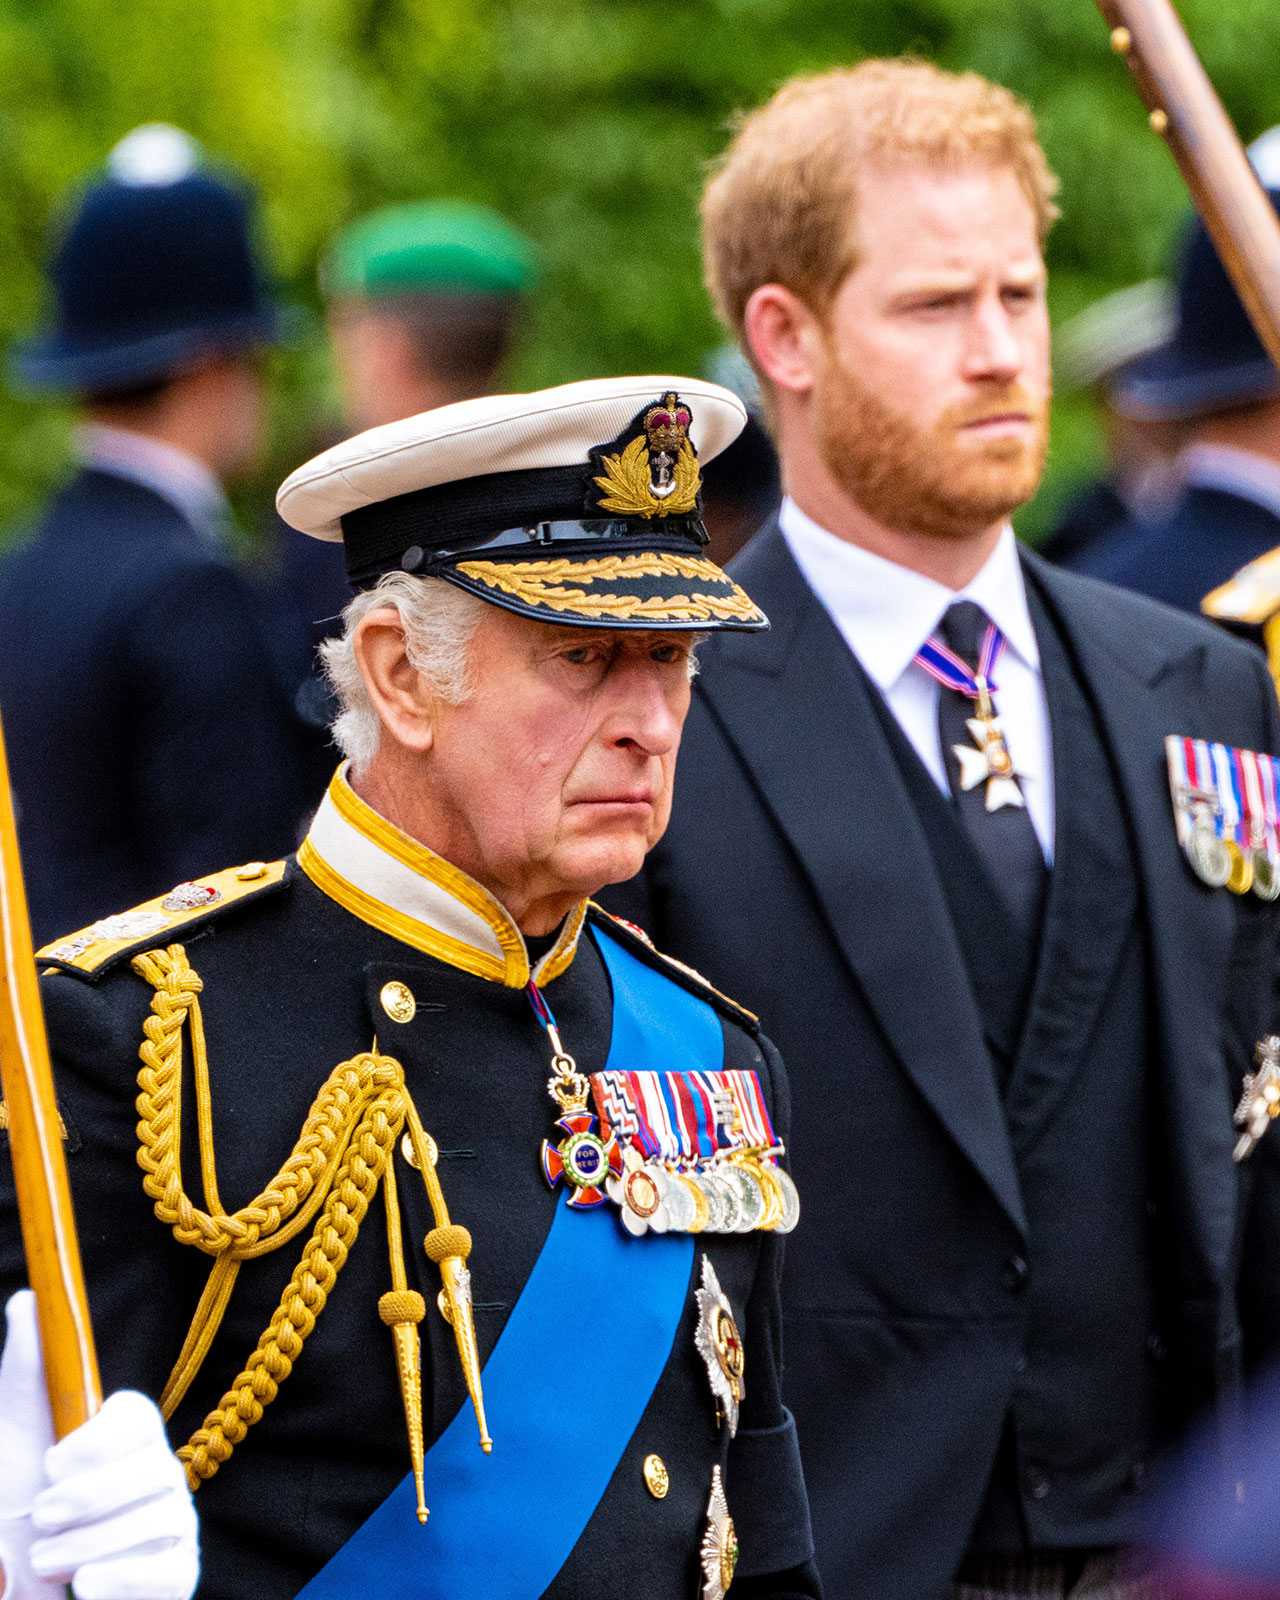 King Charles with Prince Harry in regalia